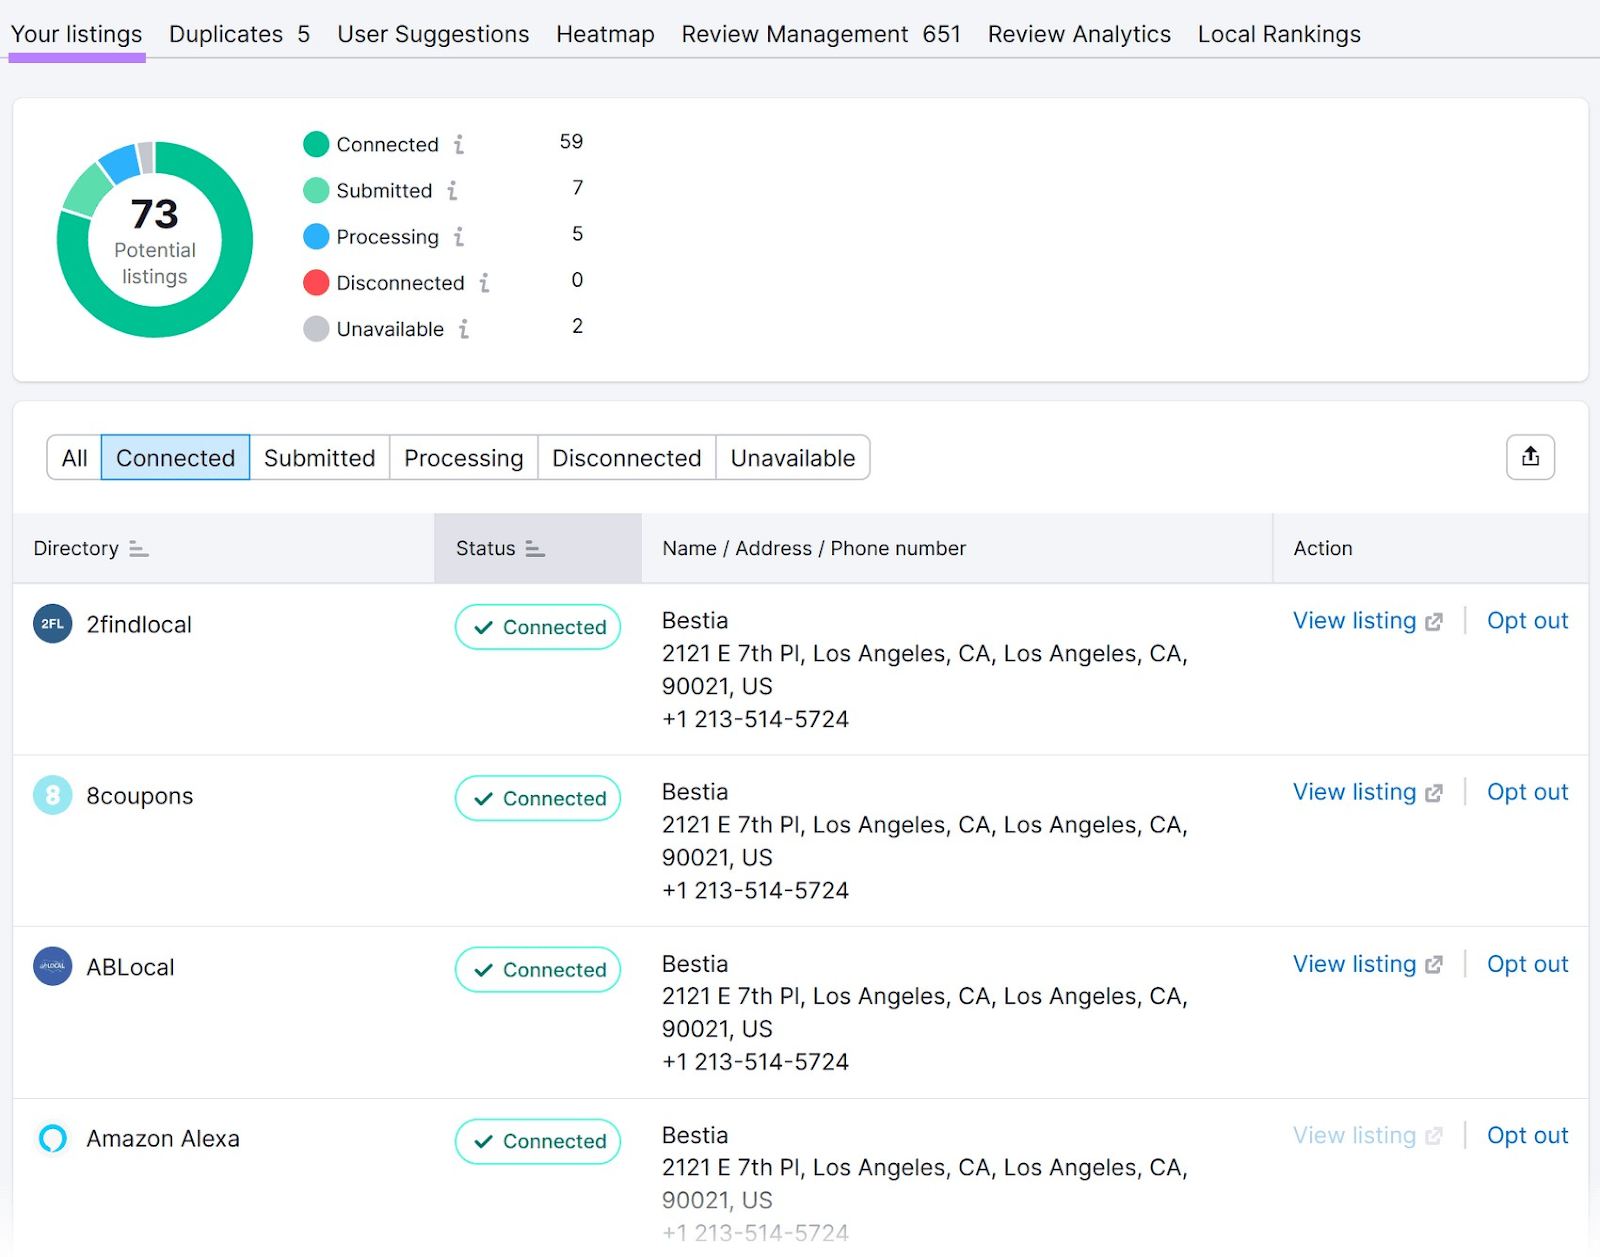 "Your listings" dashboard in Listing Management tool